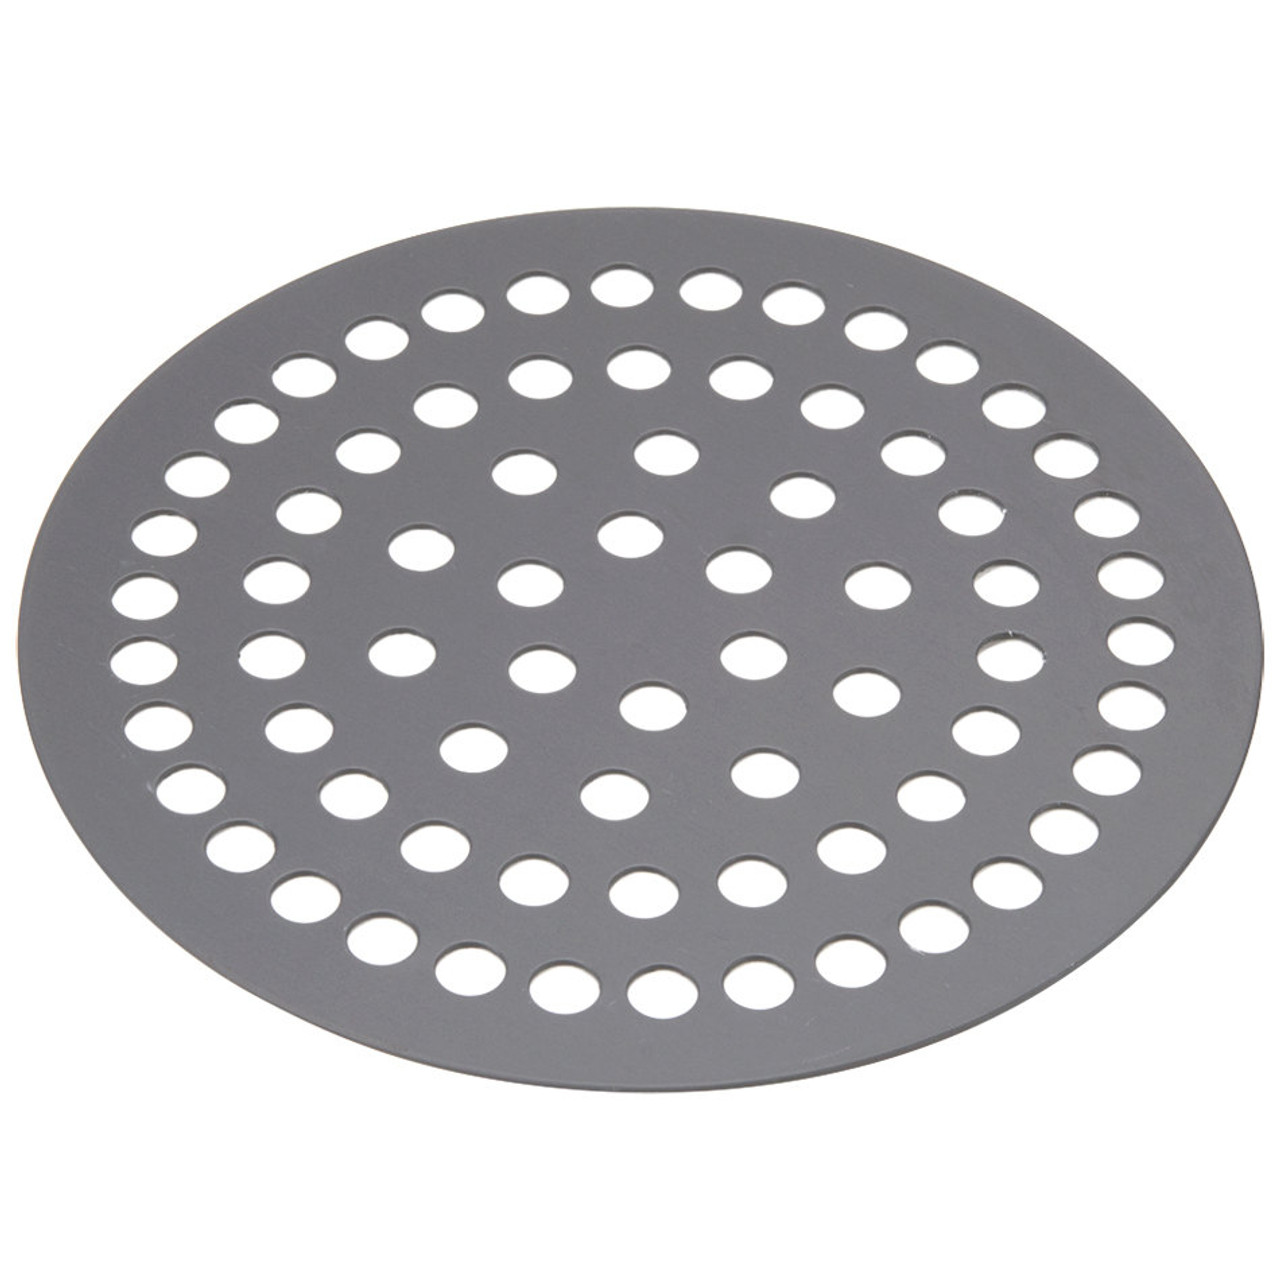 8" Super Perforated Pizza Disk - Hard Coat Anodized Aluminum-American Metalcraft 18908SPHC 